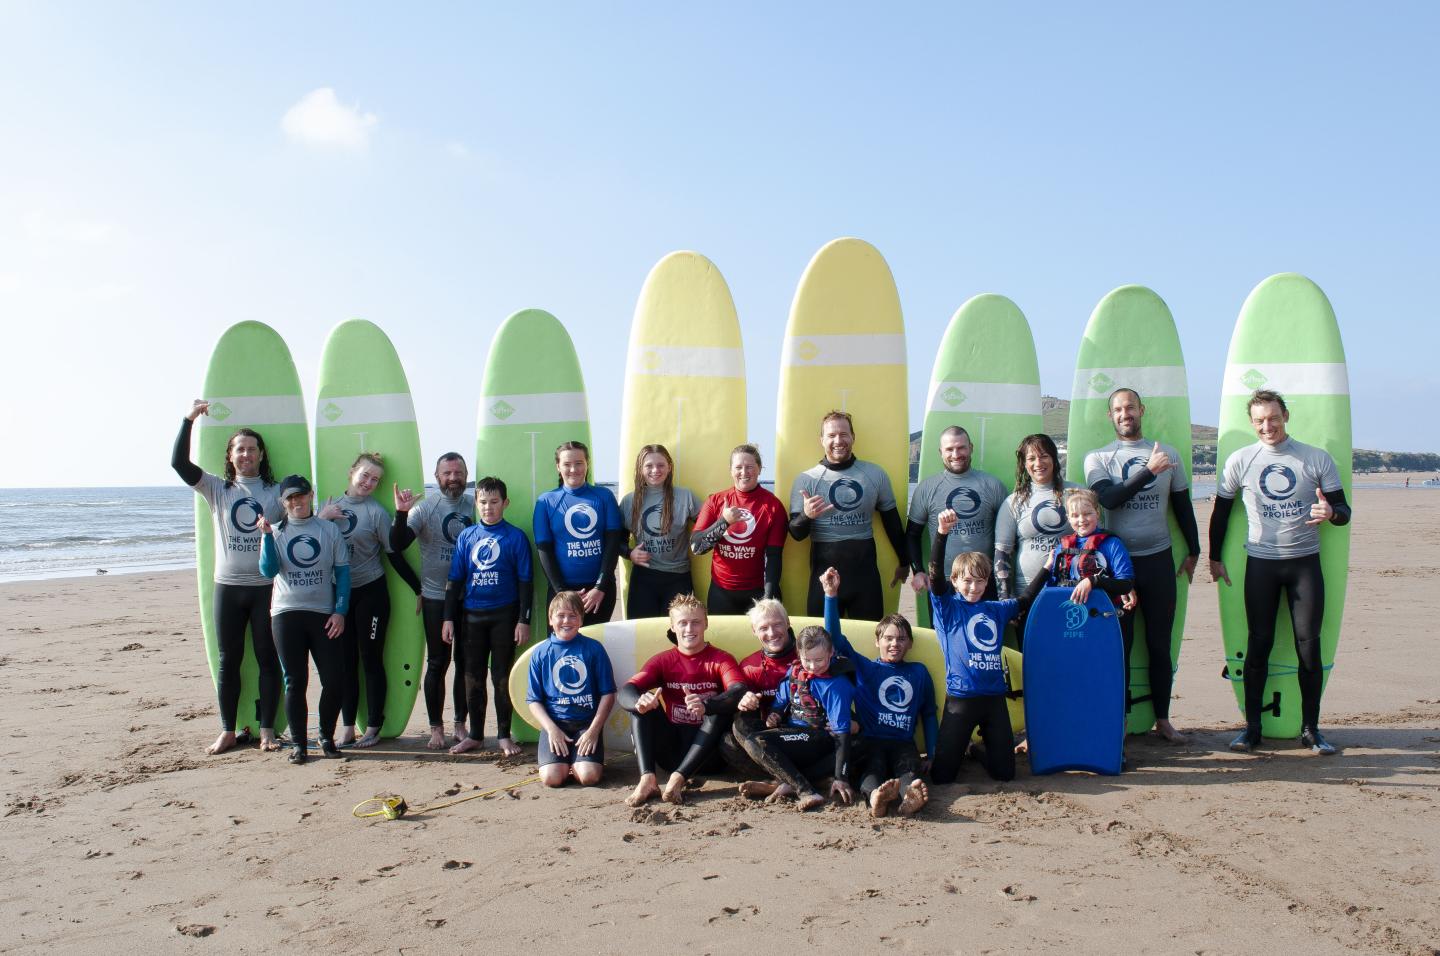 A group of people standing in front of surfboards with chidden sitting in front of them on a sandy beach. Blue sky in the background.